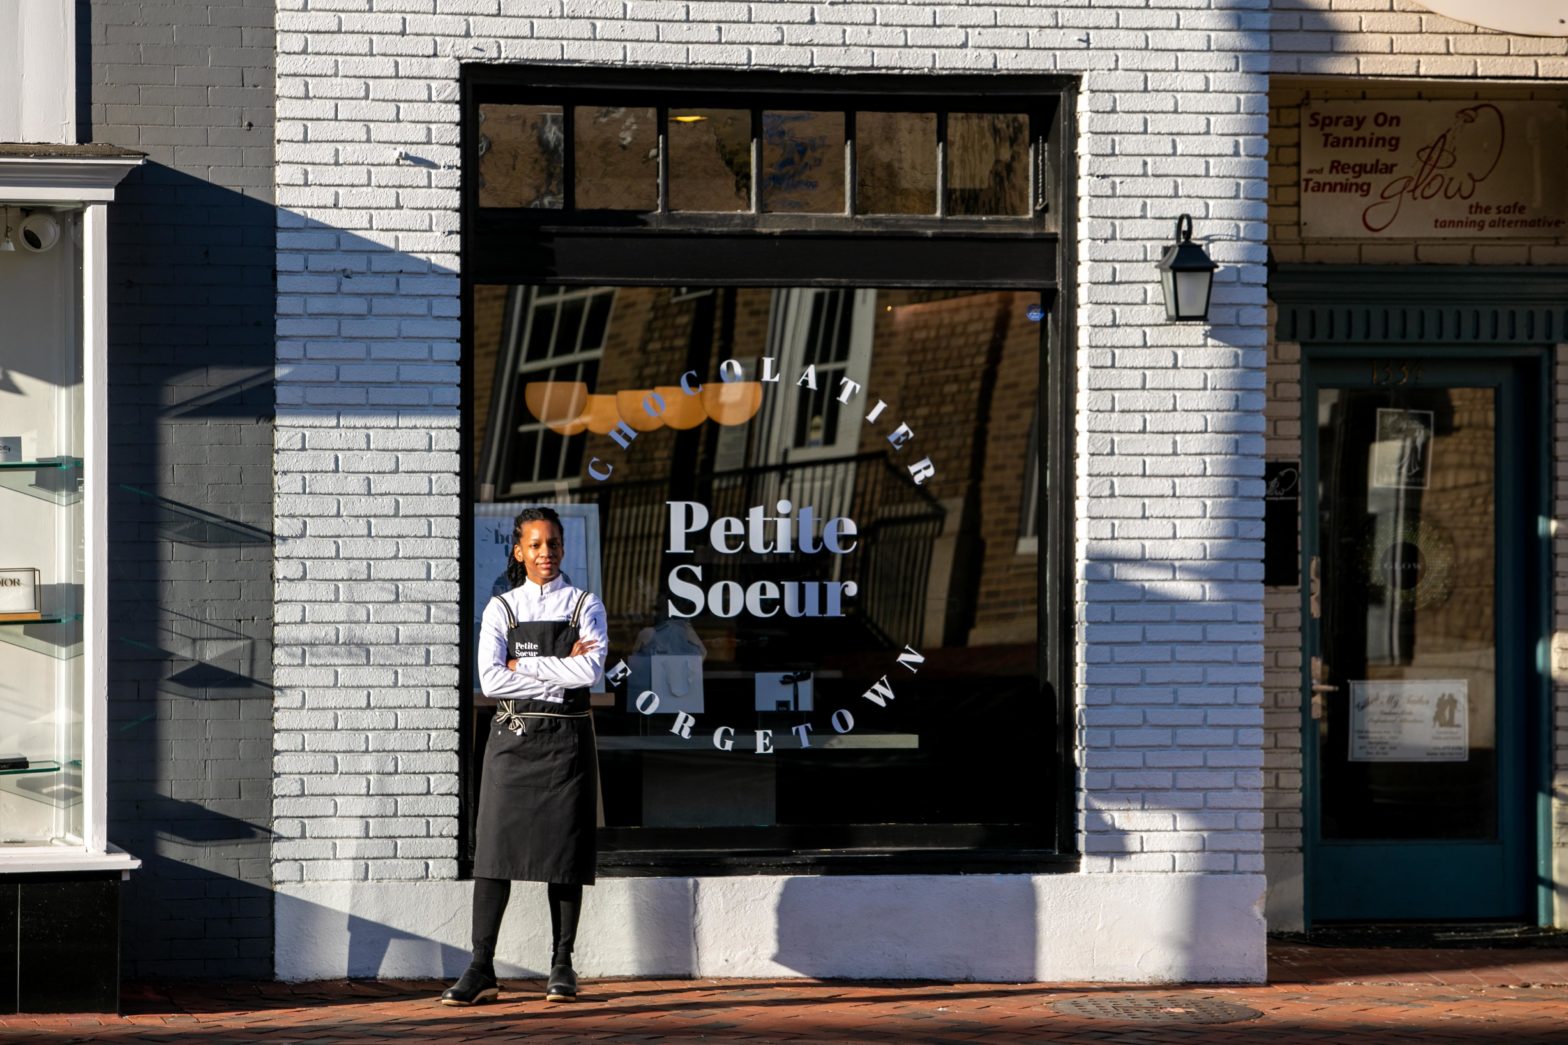 “Bonbons and Bouquets” Grand Opening at Petite Soeur